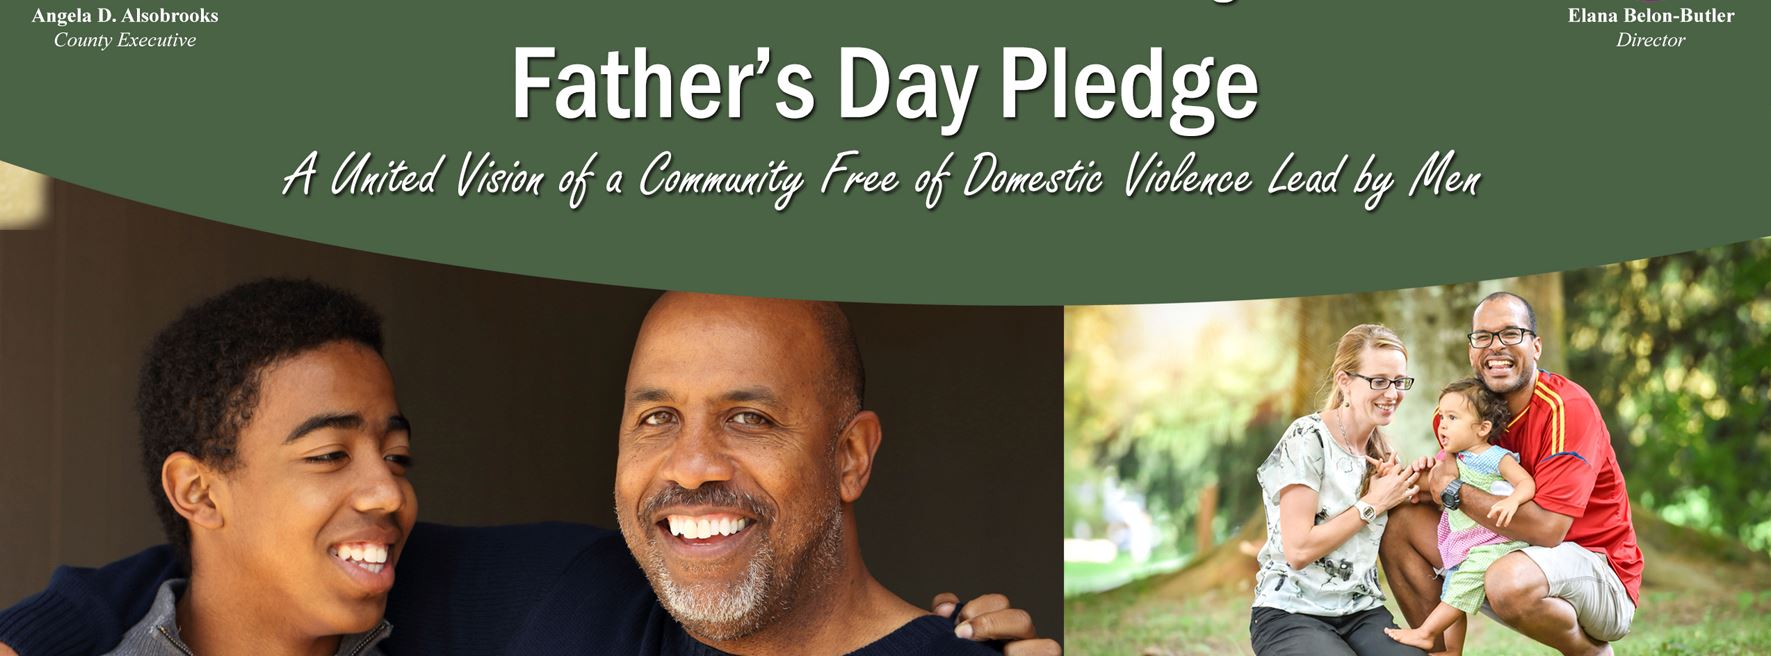 Father's Day Pledge Banner